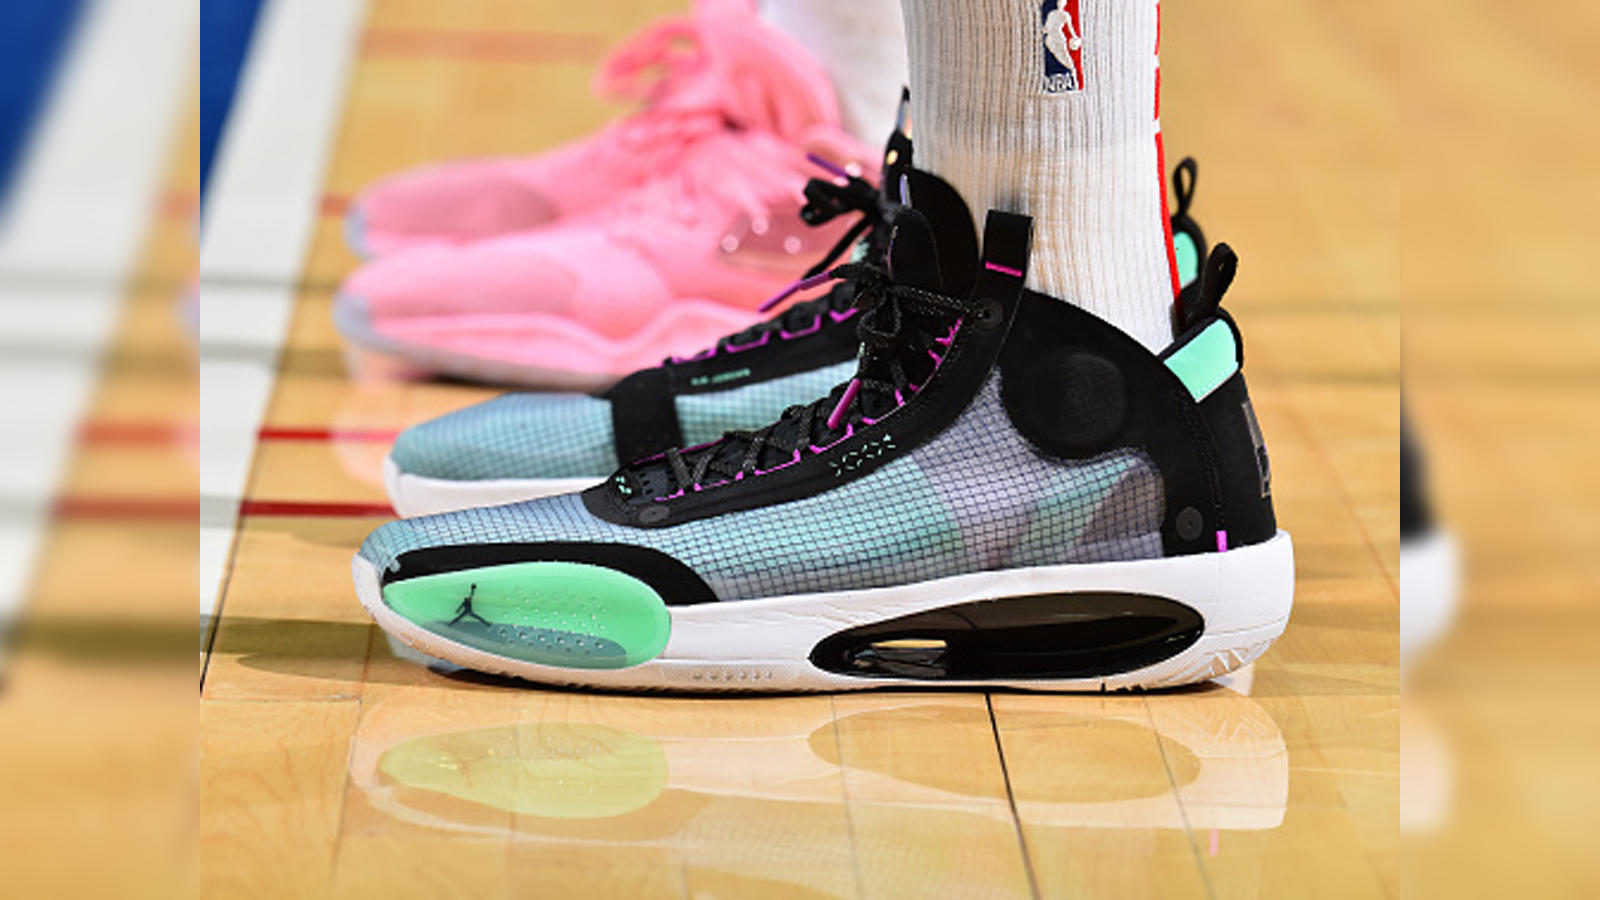 A general view of the pink Adidas basketball sneakers worn by News Photo  - Getty Images